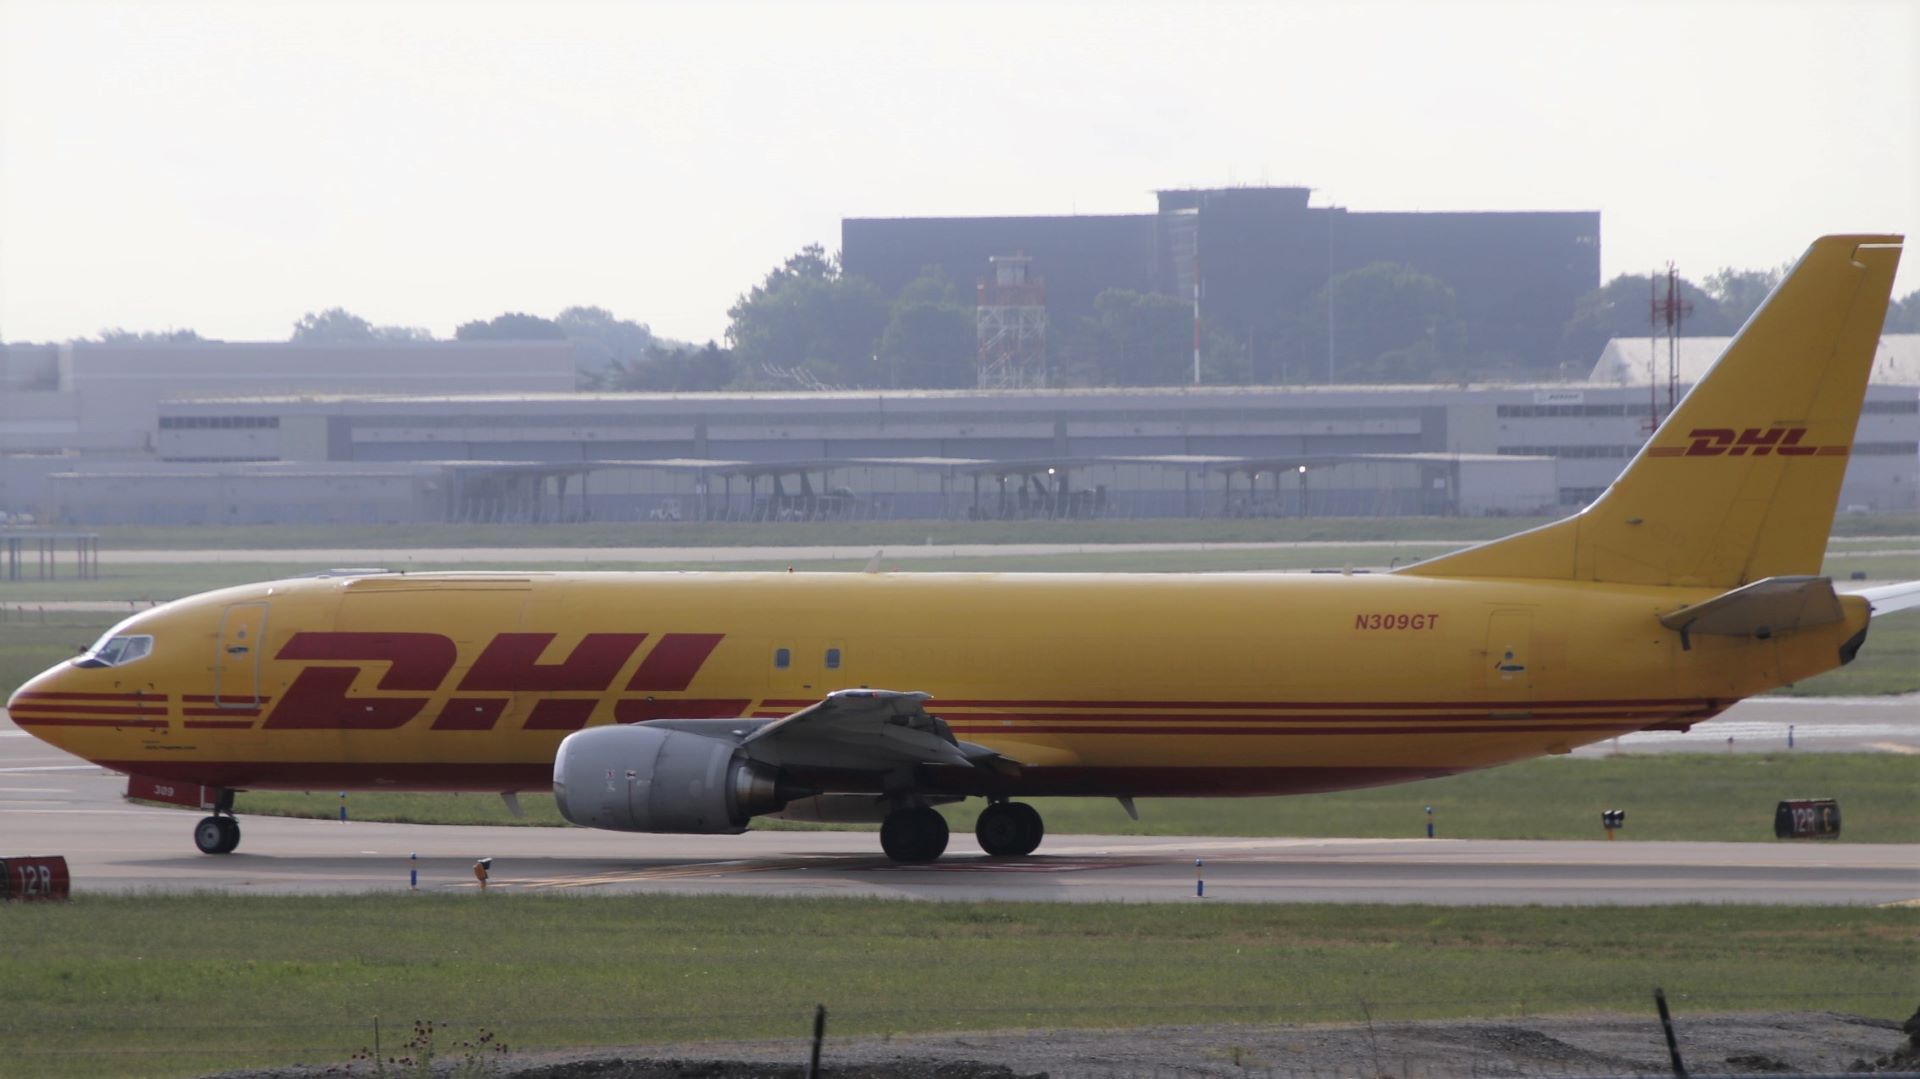 A mustard-colored DHL cargo jet on the taxiway.